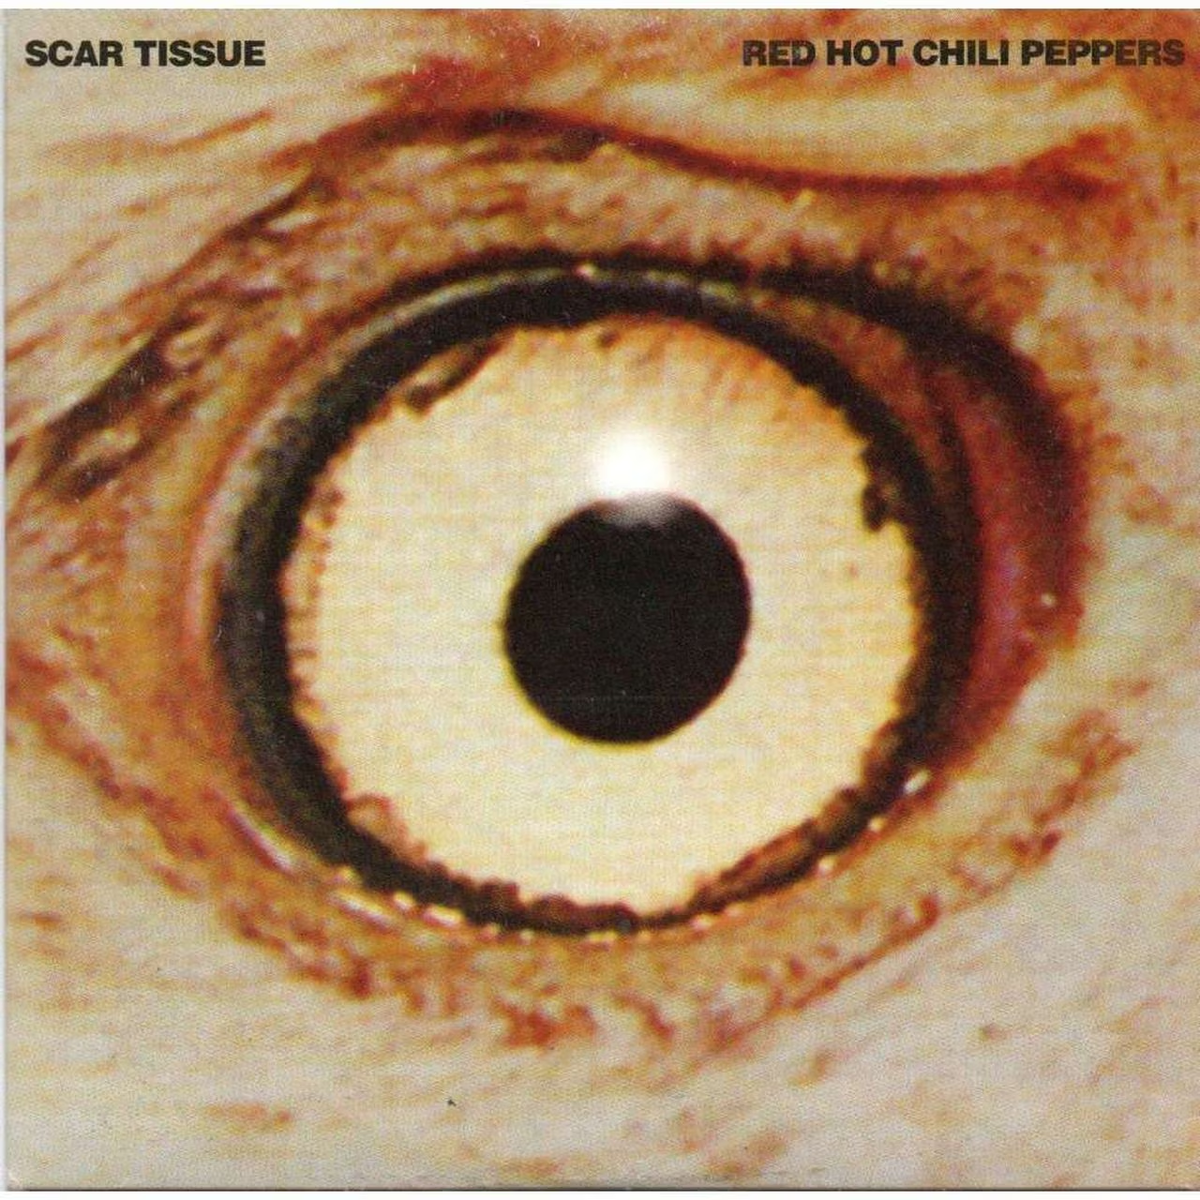 Peppers scar. Scar Tissue Red hot Chili Peppers. Scar Tissue Red hot Chili Peppers обложка. Red hot Chili scar Tissue. Scar Tissue Red hot Chili Peppers клип.